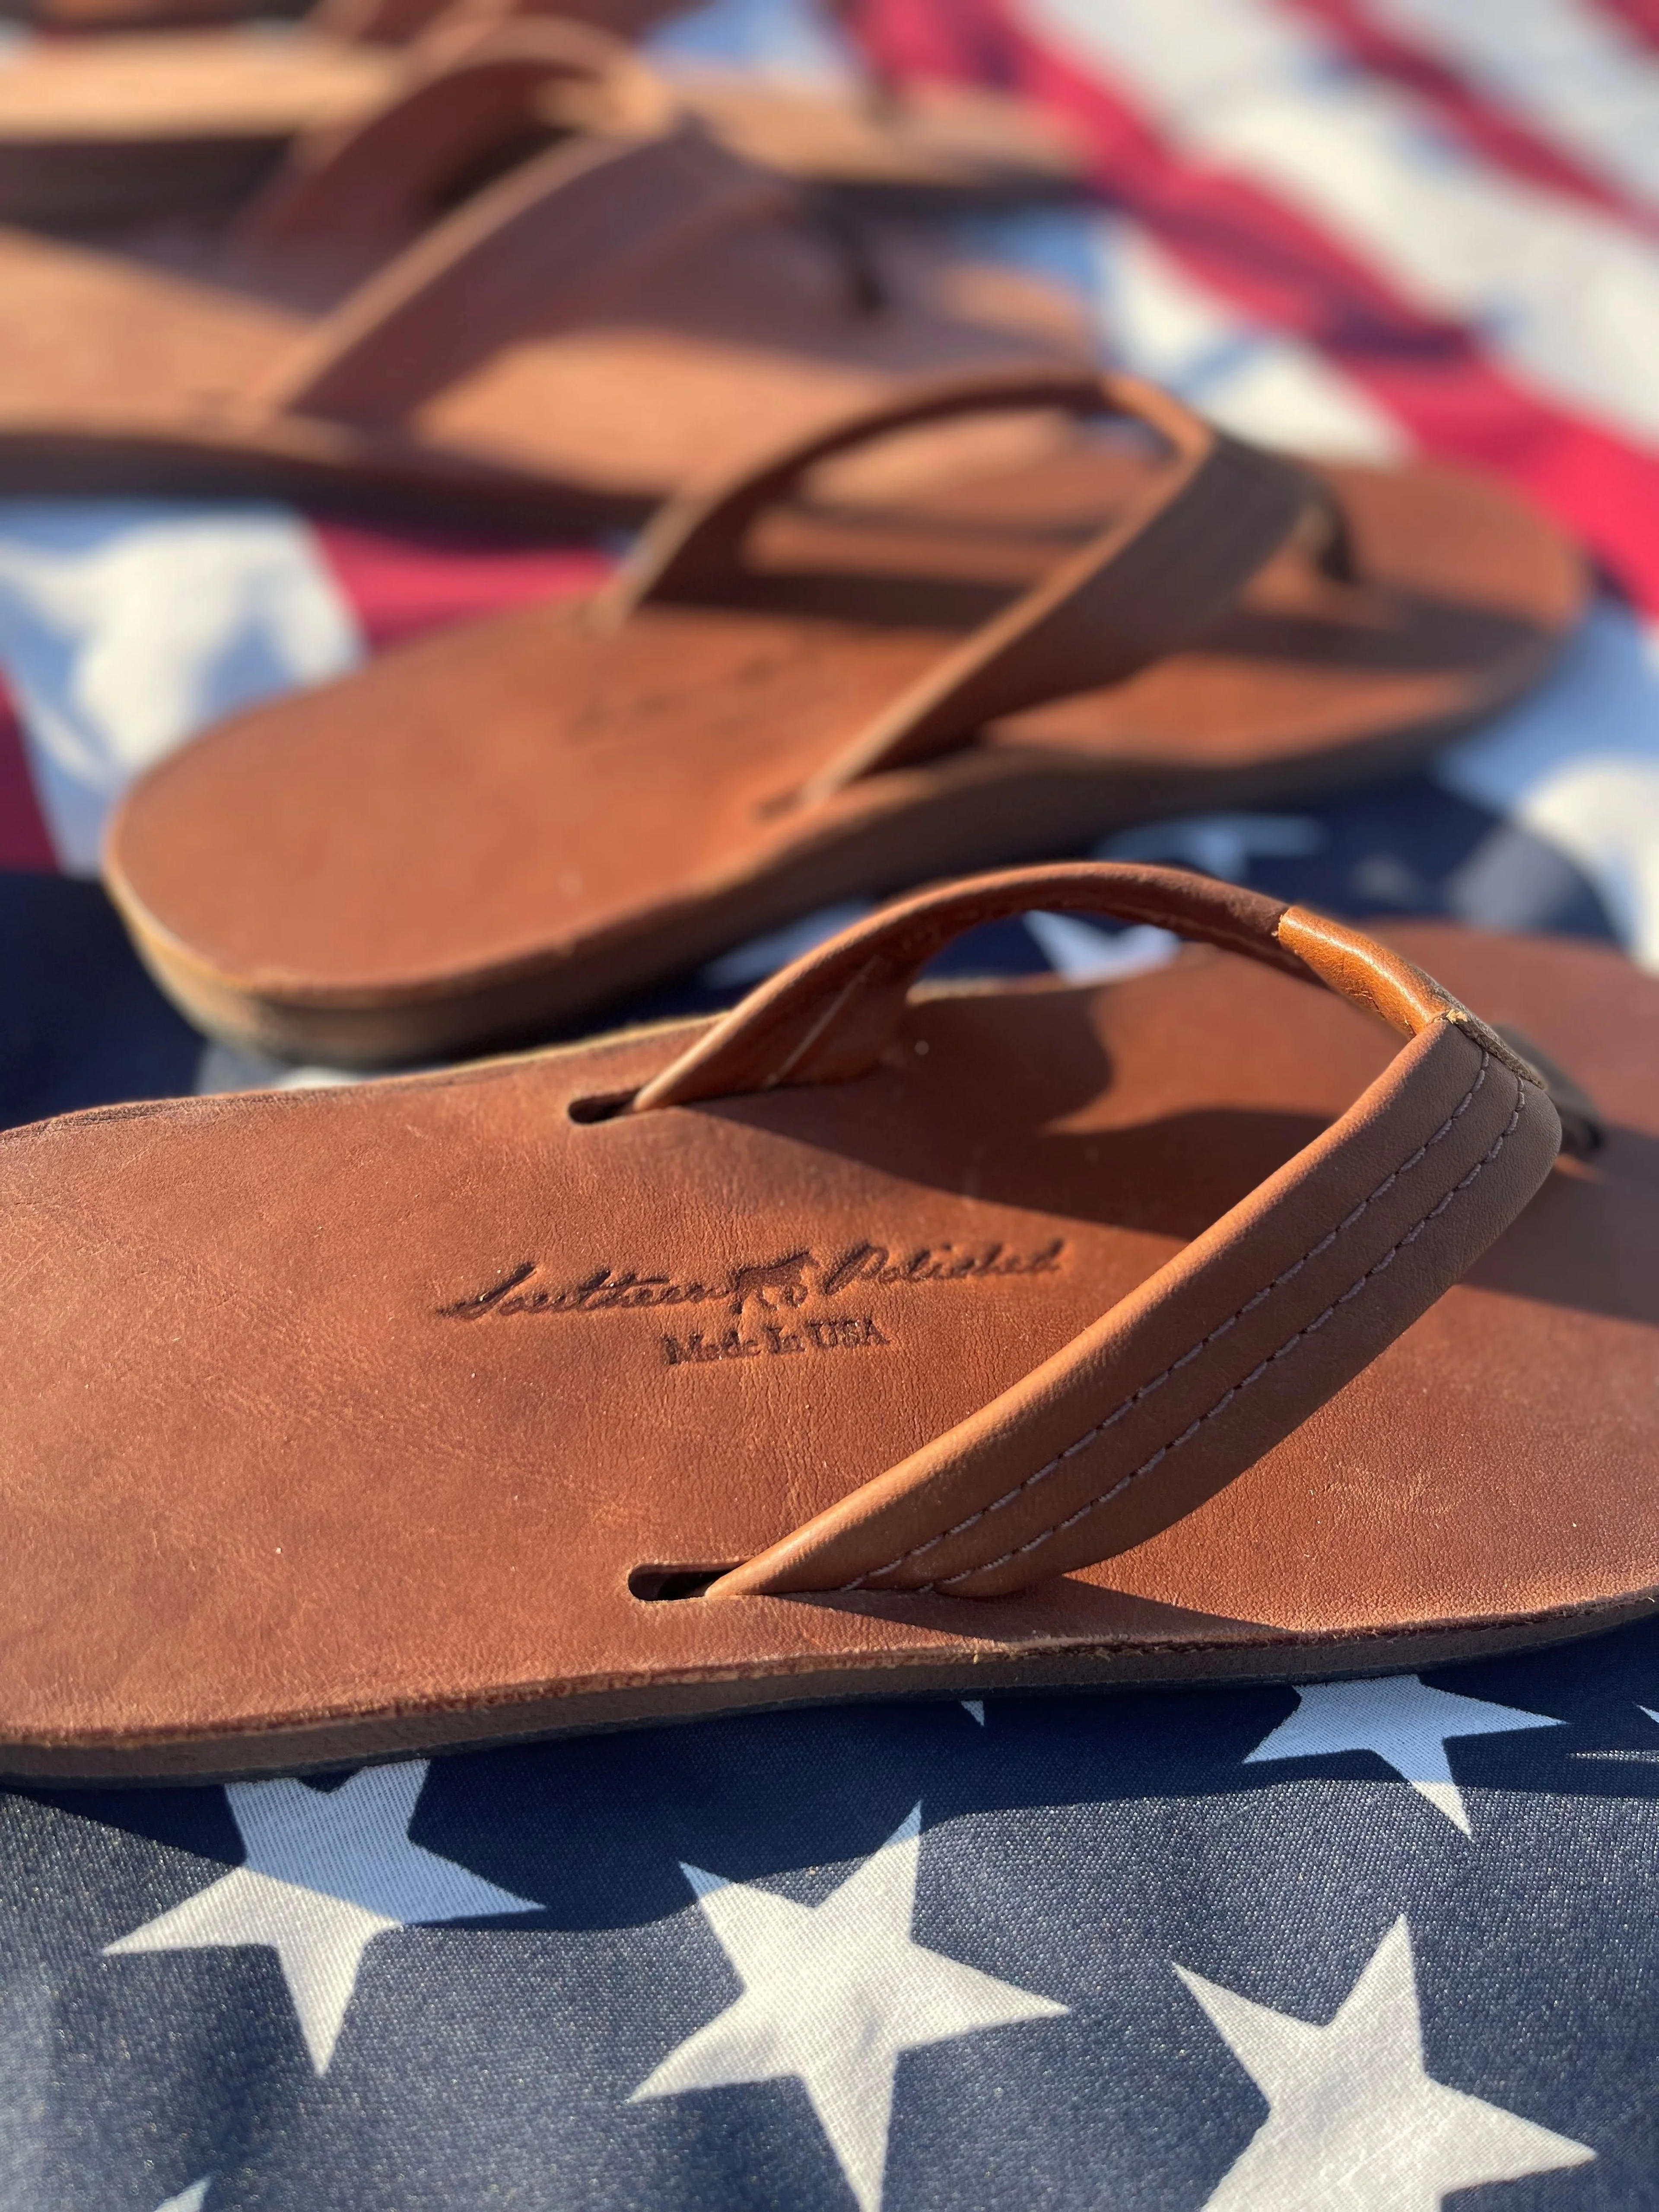 southernpolished.com/collections/mens-signature-flip-flops